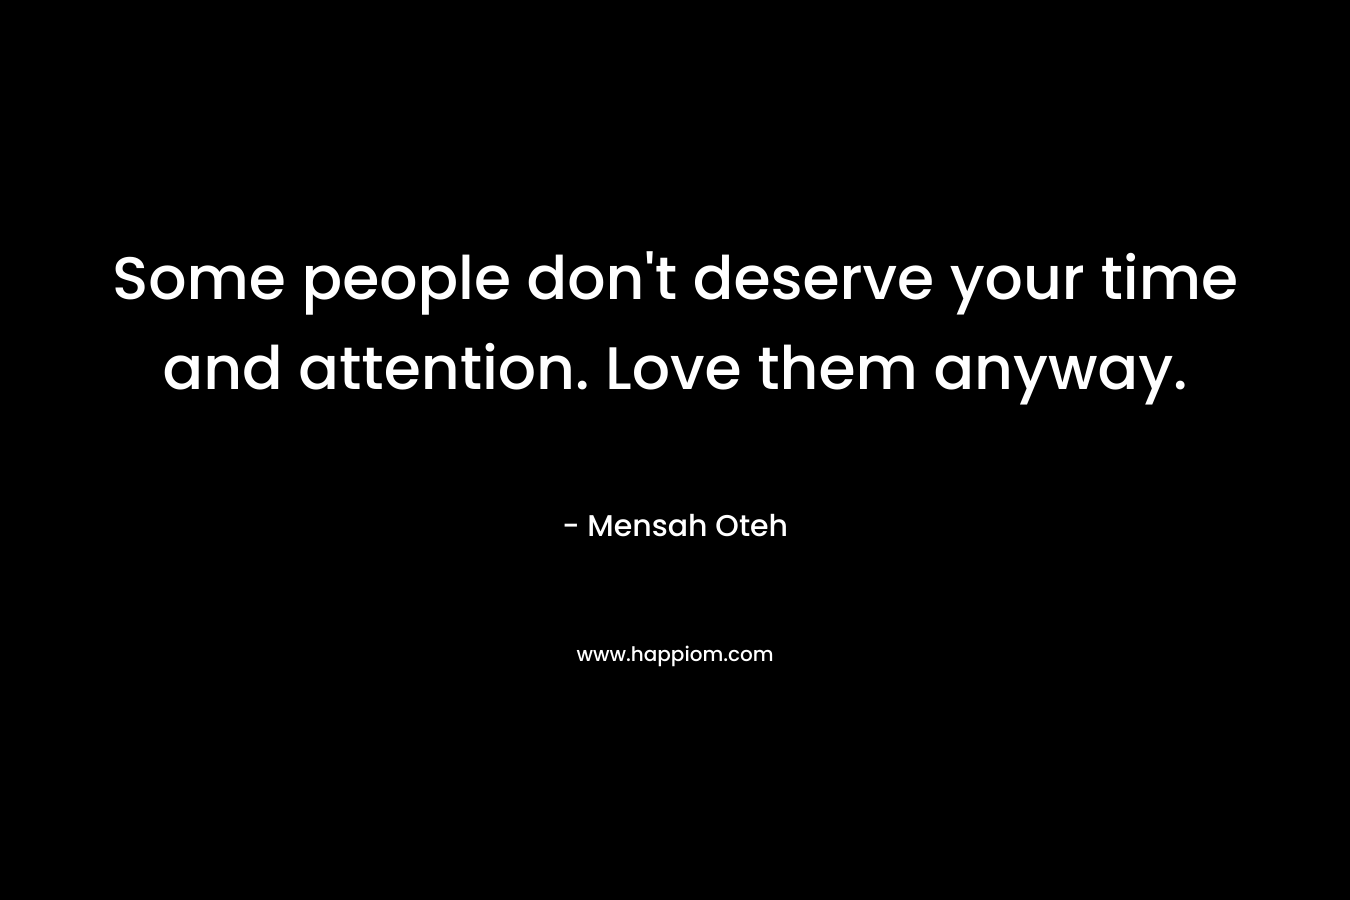 Some people don’t deserve your time and attention. Love them anyway. – Mensah Oteh